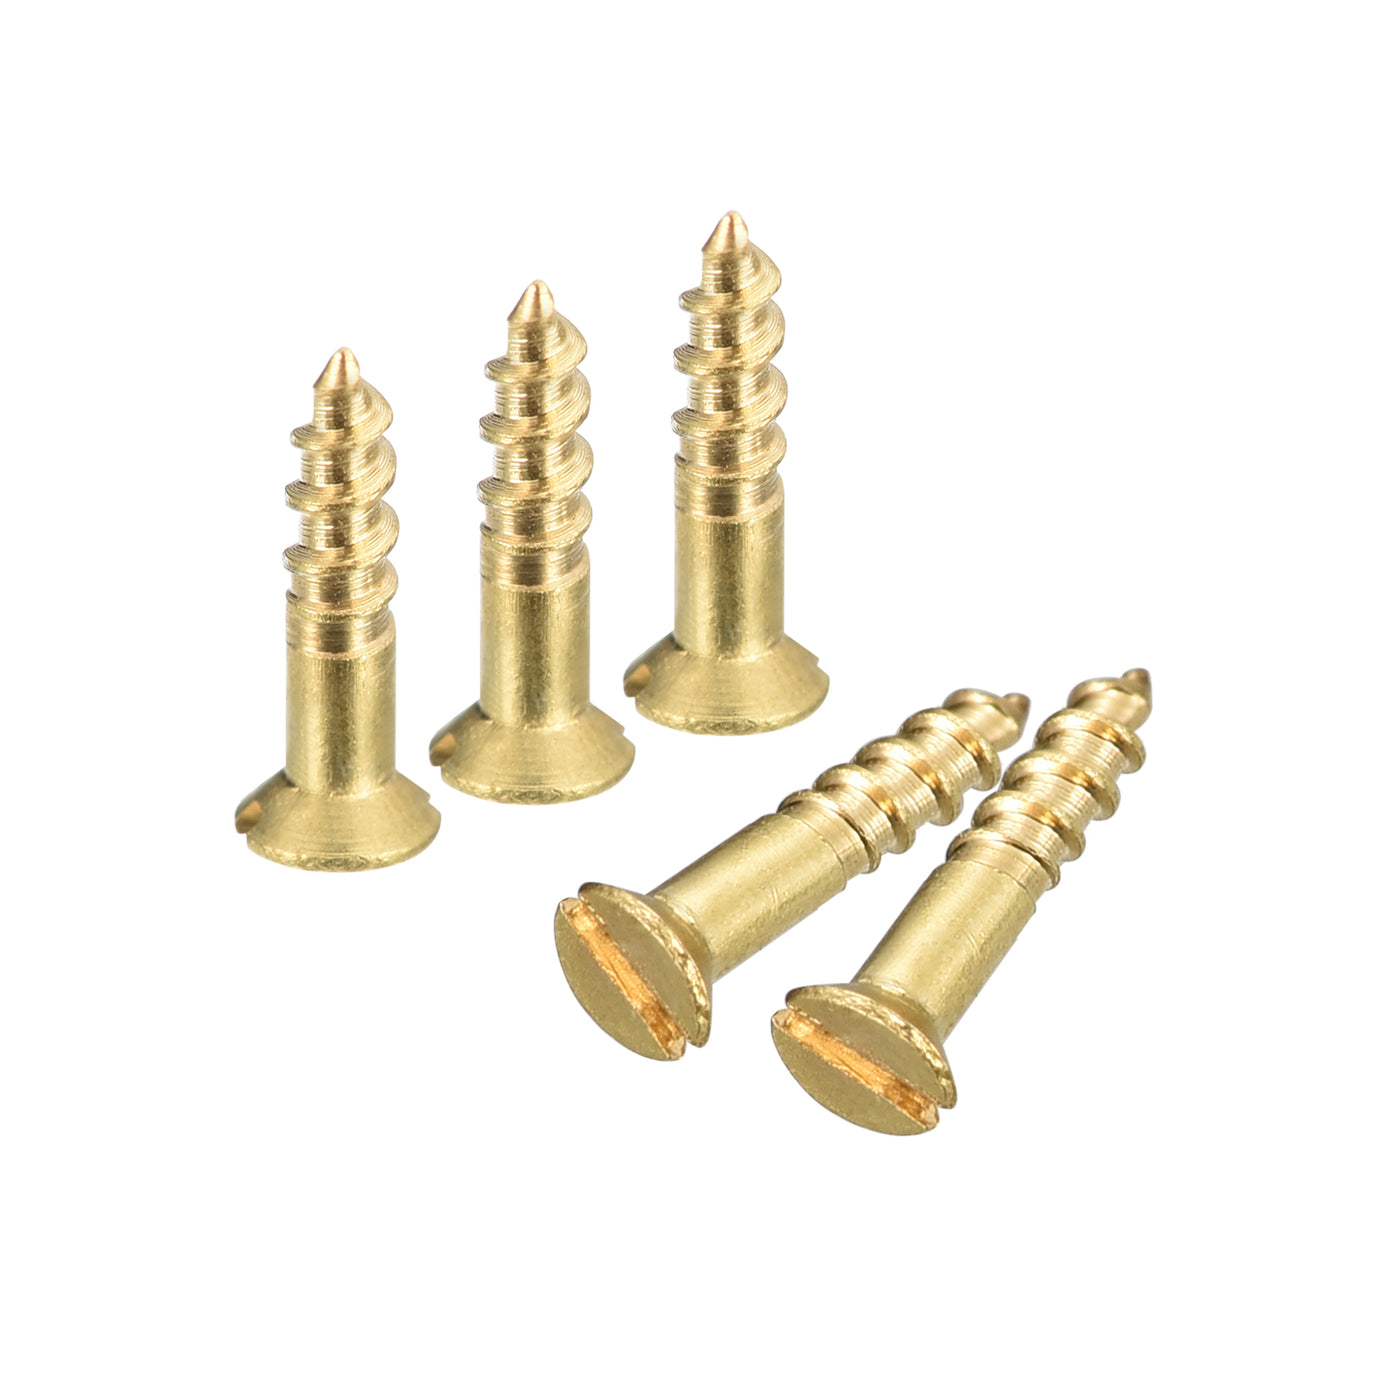 uxcell Uxcell 100Pcs M2 x 8mm Brass Slotted Drive Flat Head Wood Screws Self Tapping Screw